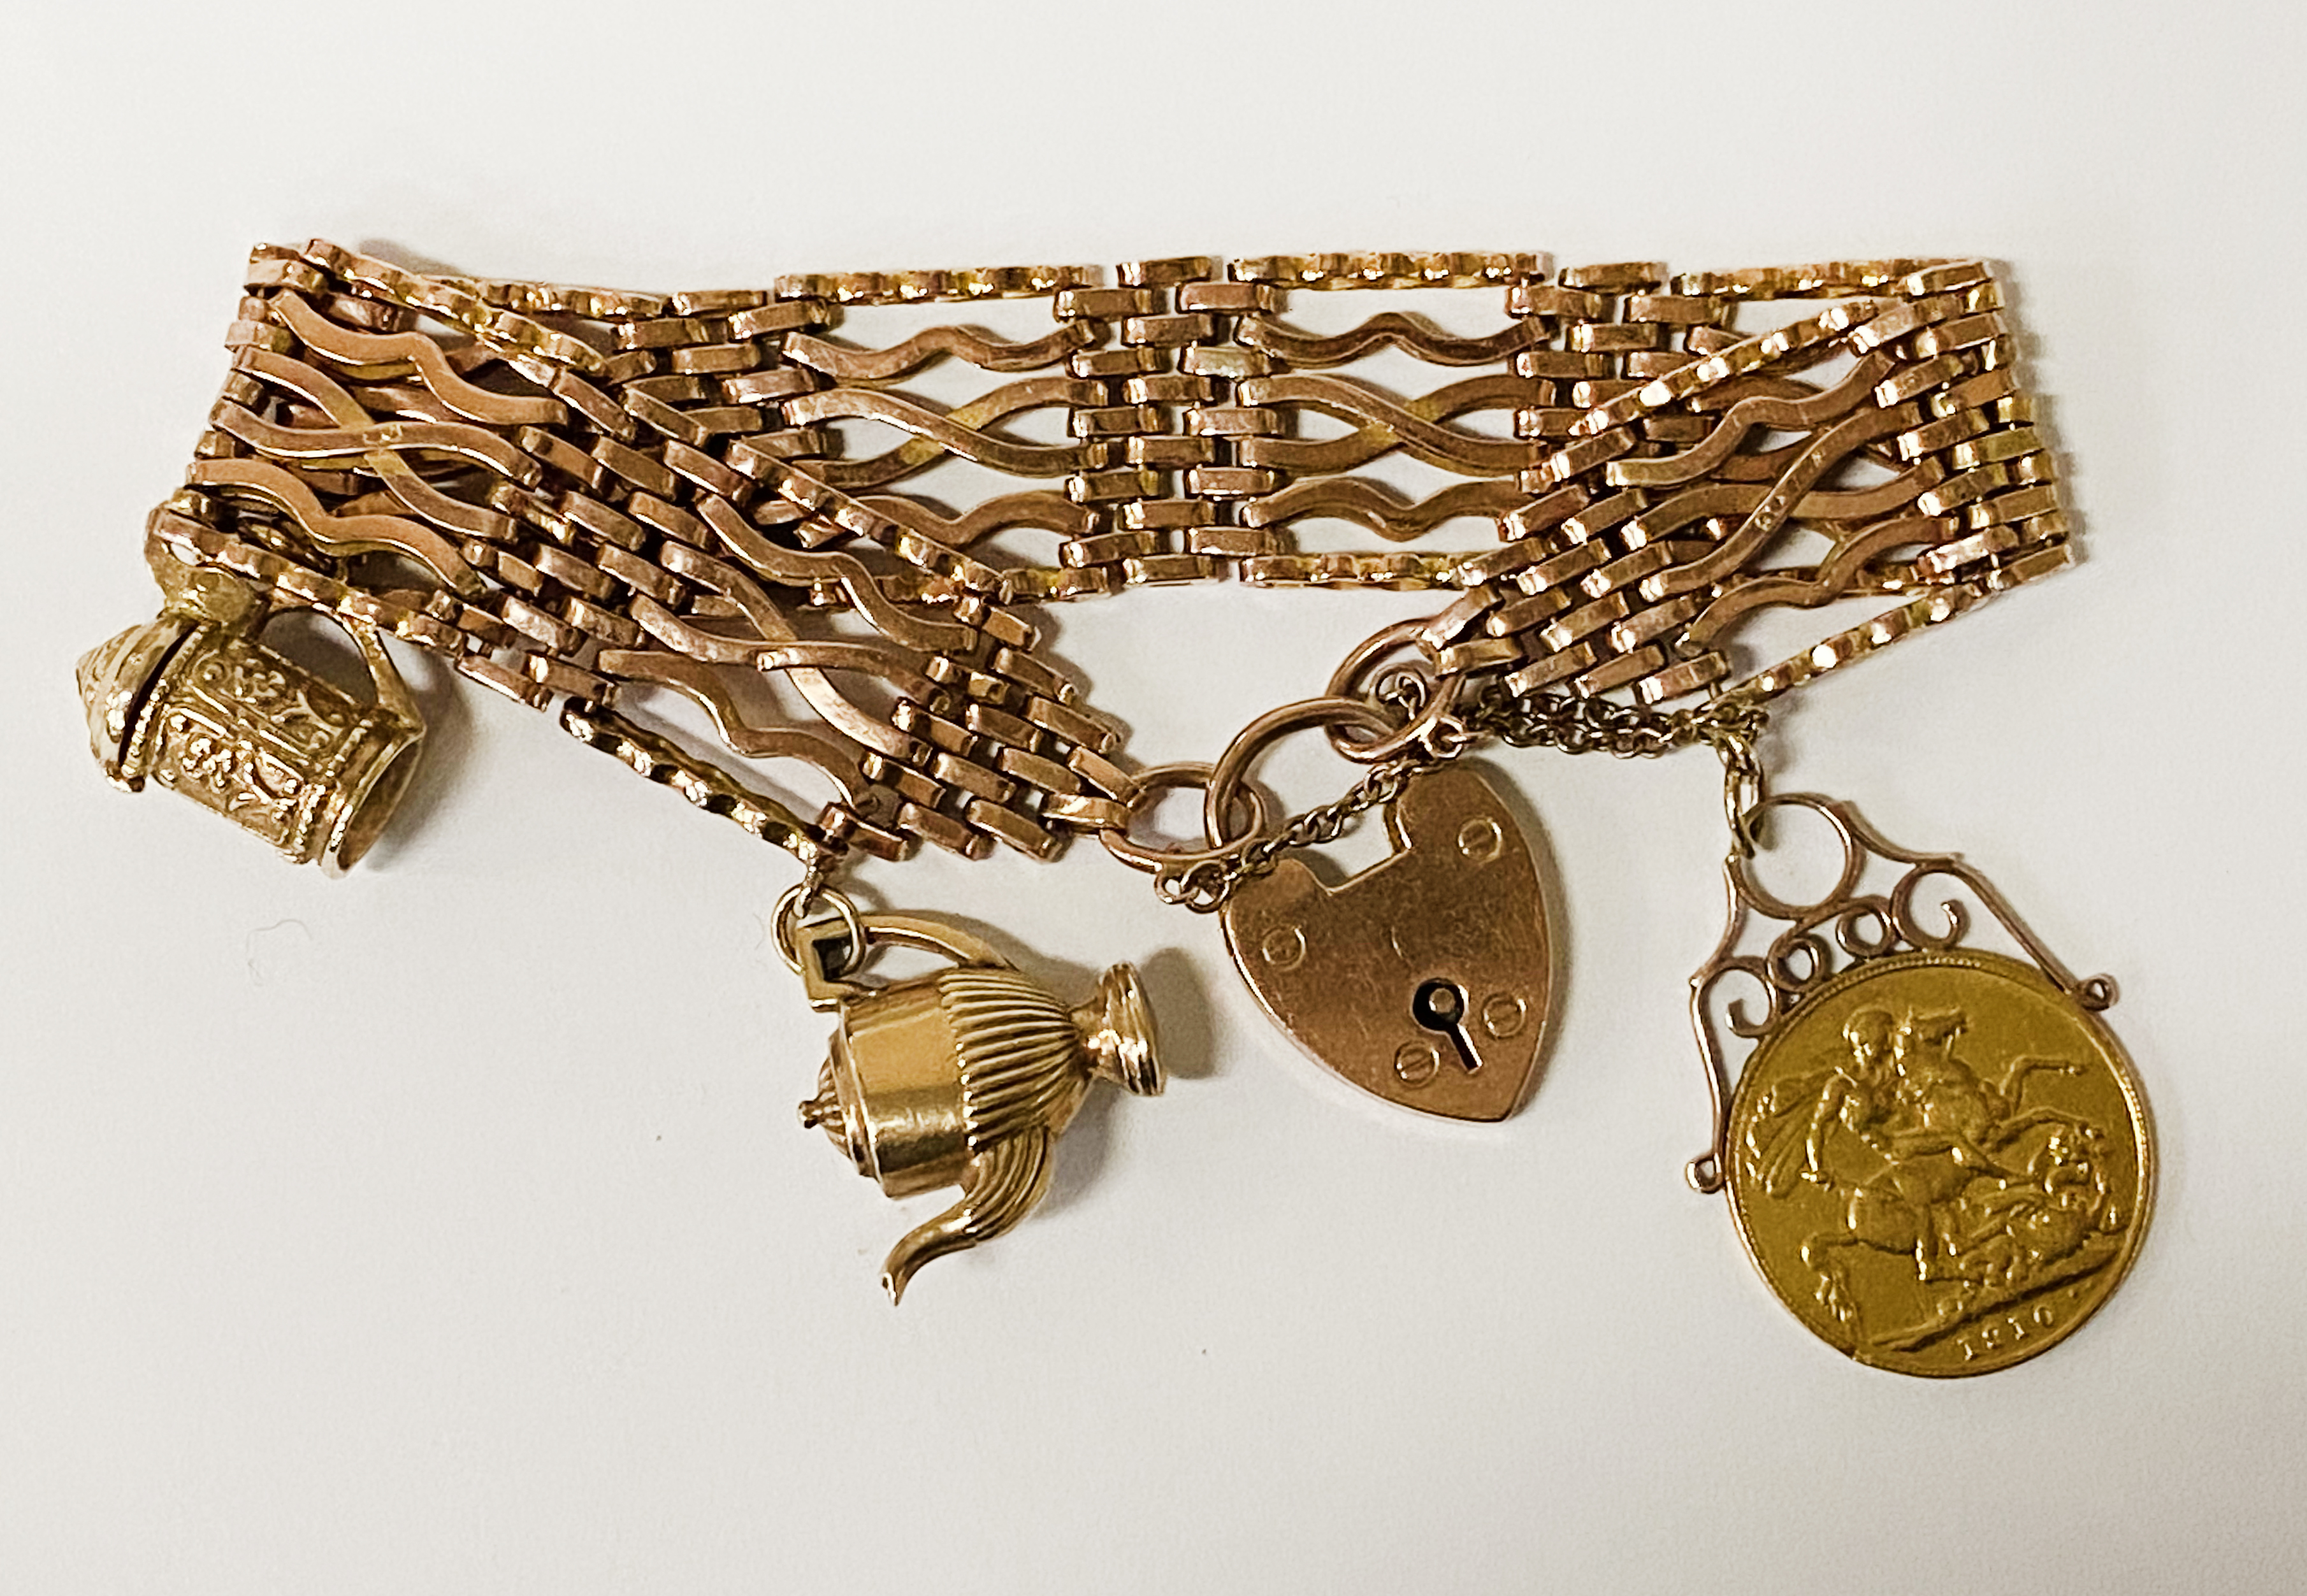 GOLD SOVEREIGN -1910 WITH MOUNT ON 9CT GOLD GATE BRACELET & CHARMS APPROX 46 GRAMS TOTAL